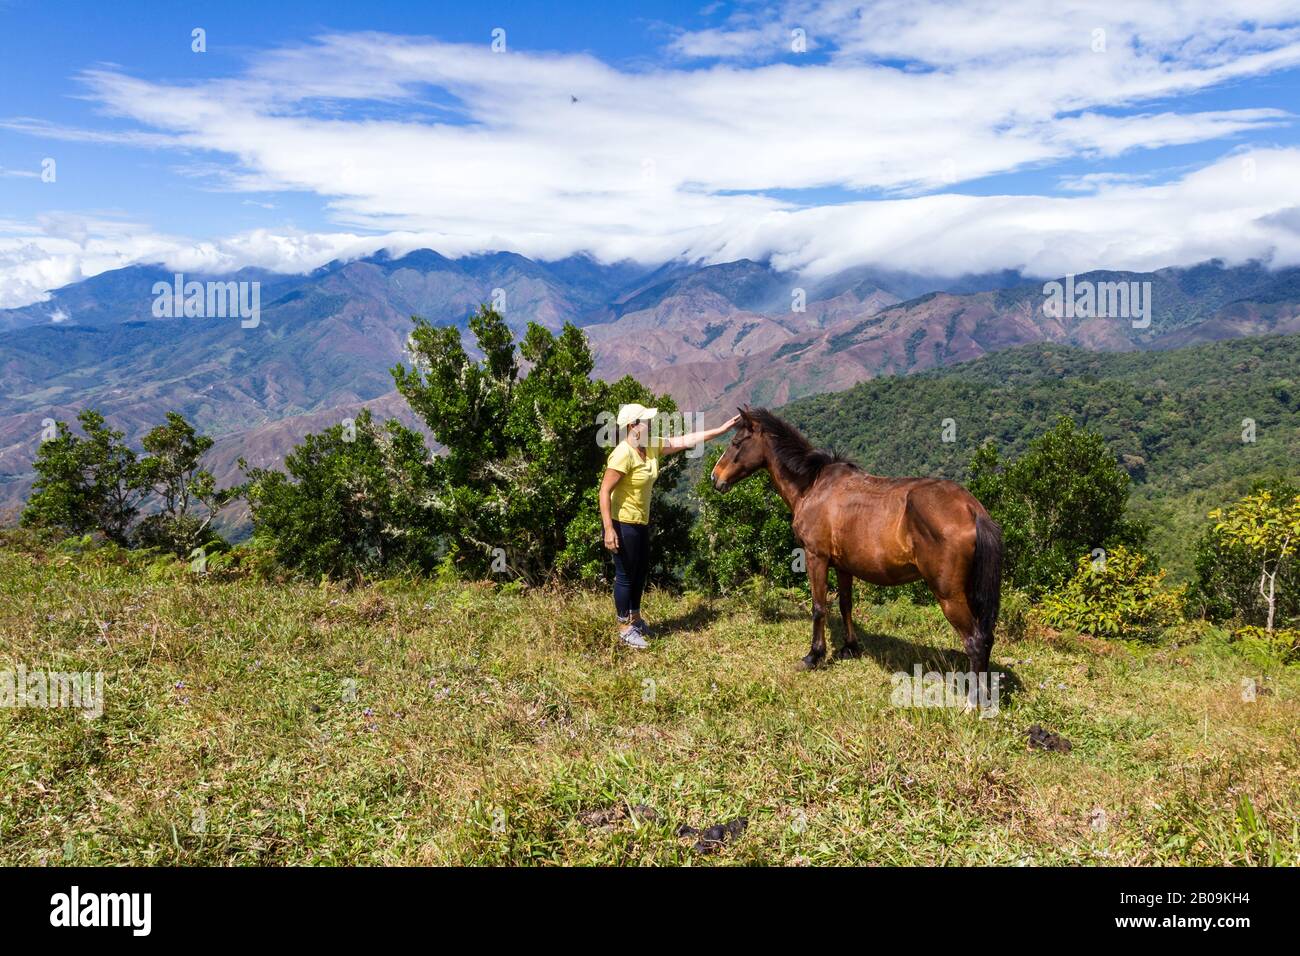 Local Costa Rican woman with her horse high in the mountains of Costa Rica Stock Photo